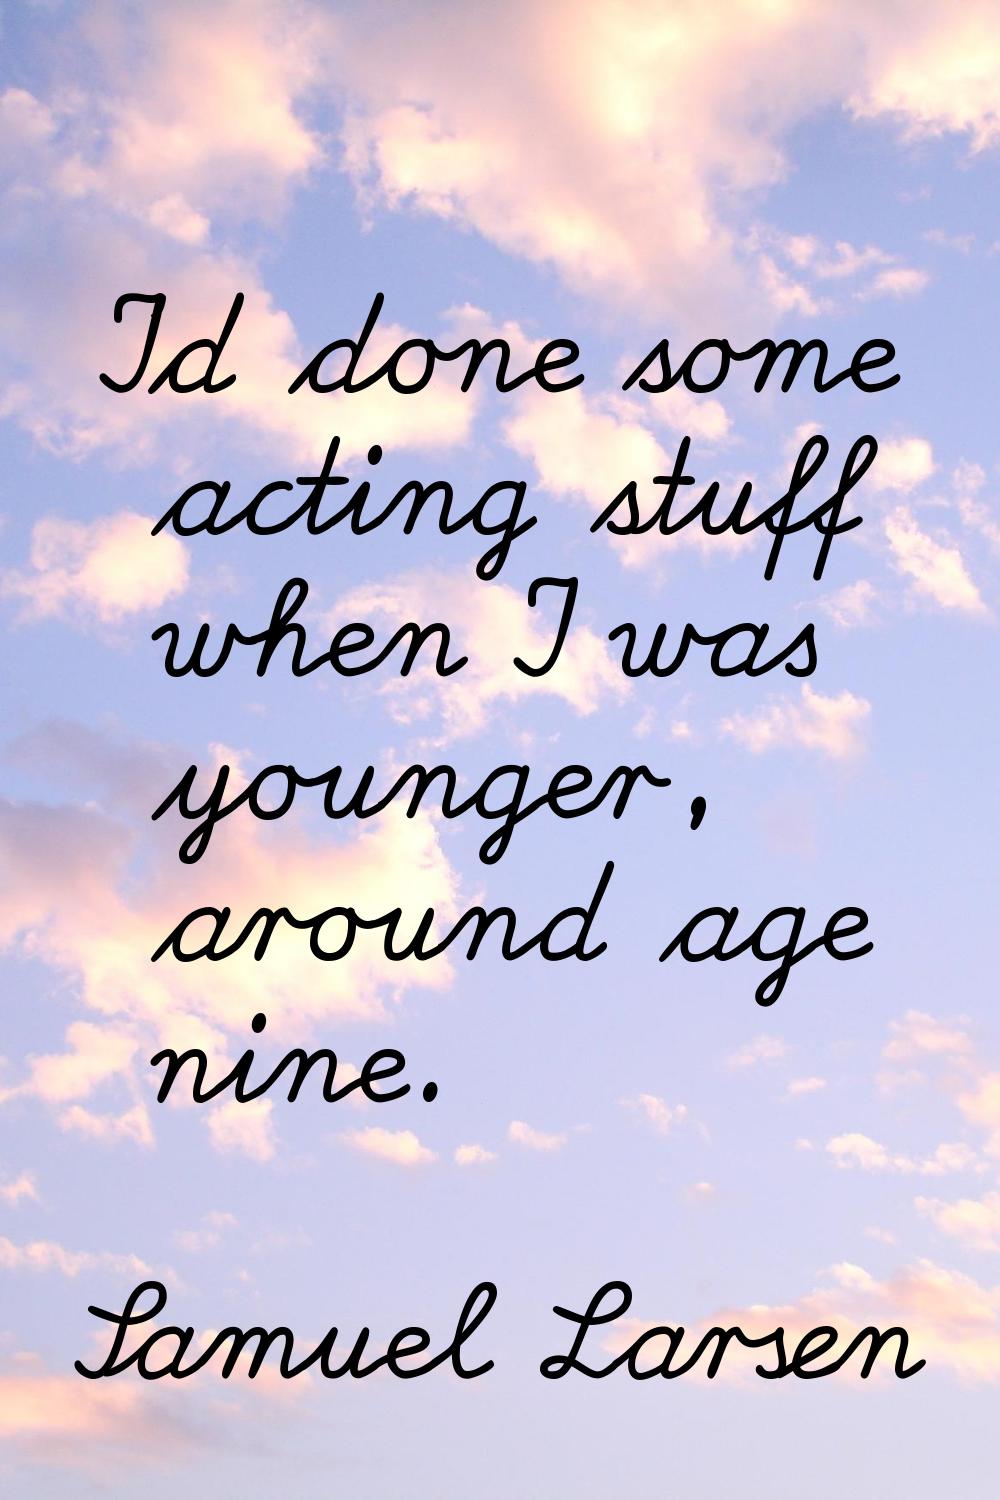 I'd done some acting stuff when I was younger, around age nine.